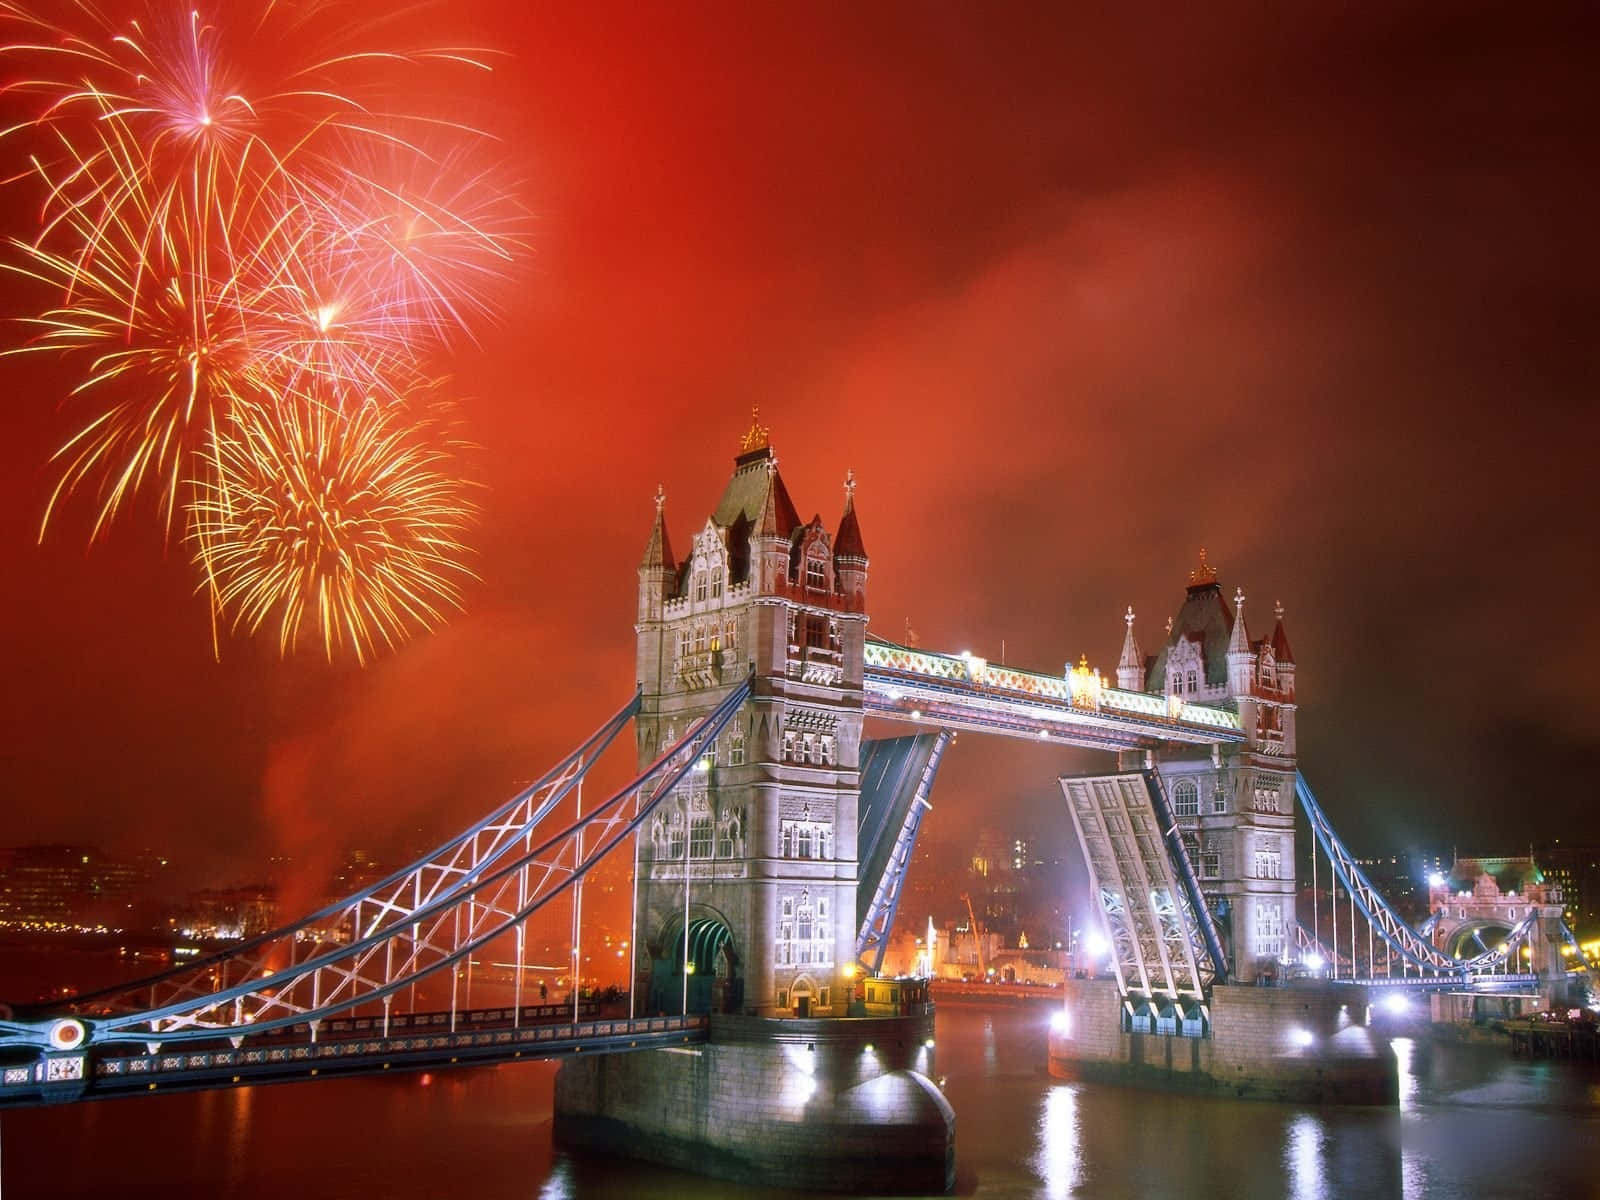 A New Year's Eve Fireworks Display Over Tower Bridge In London